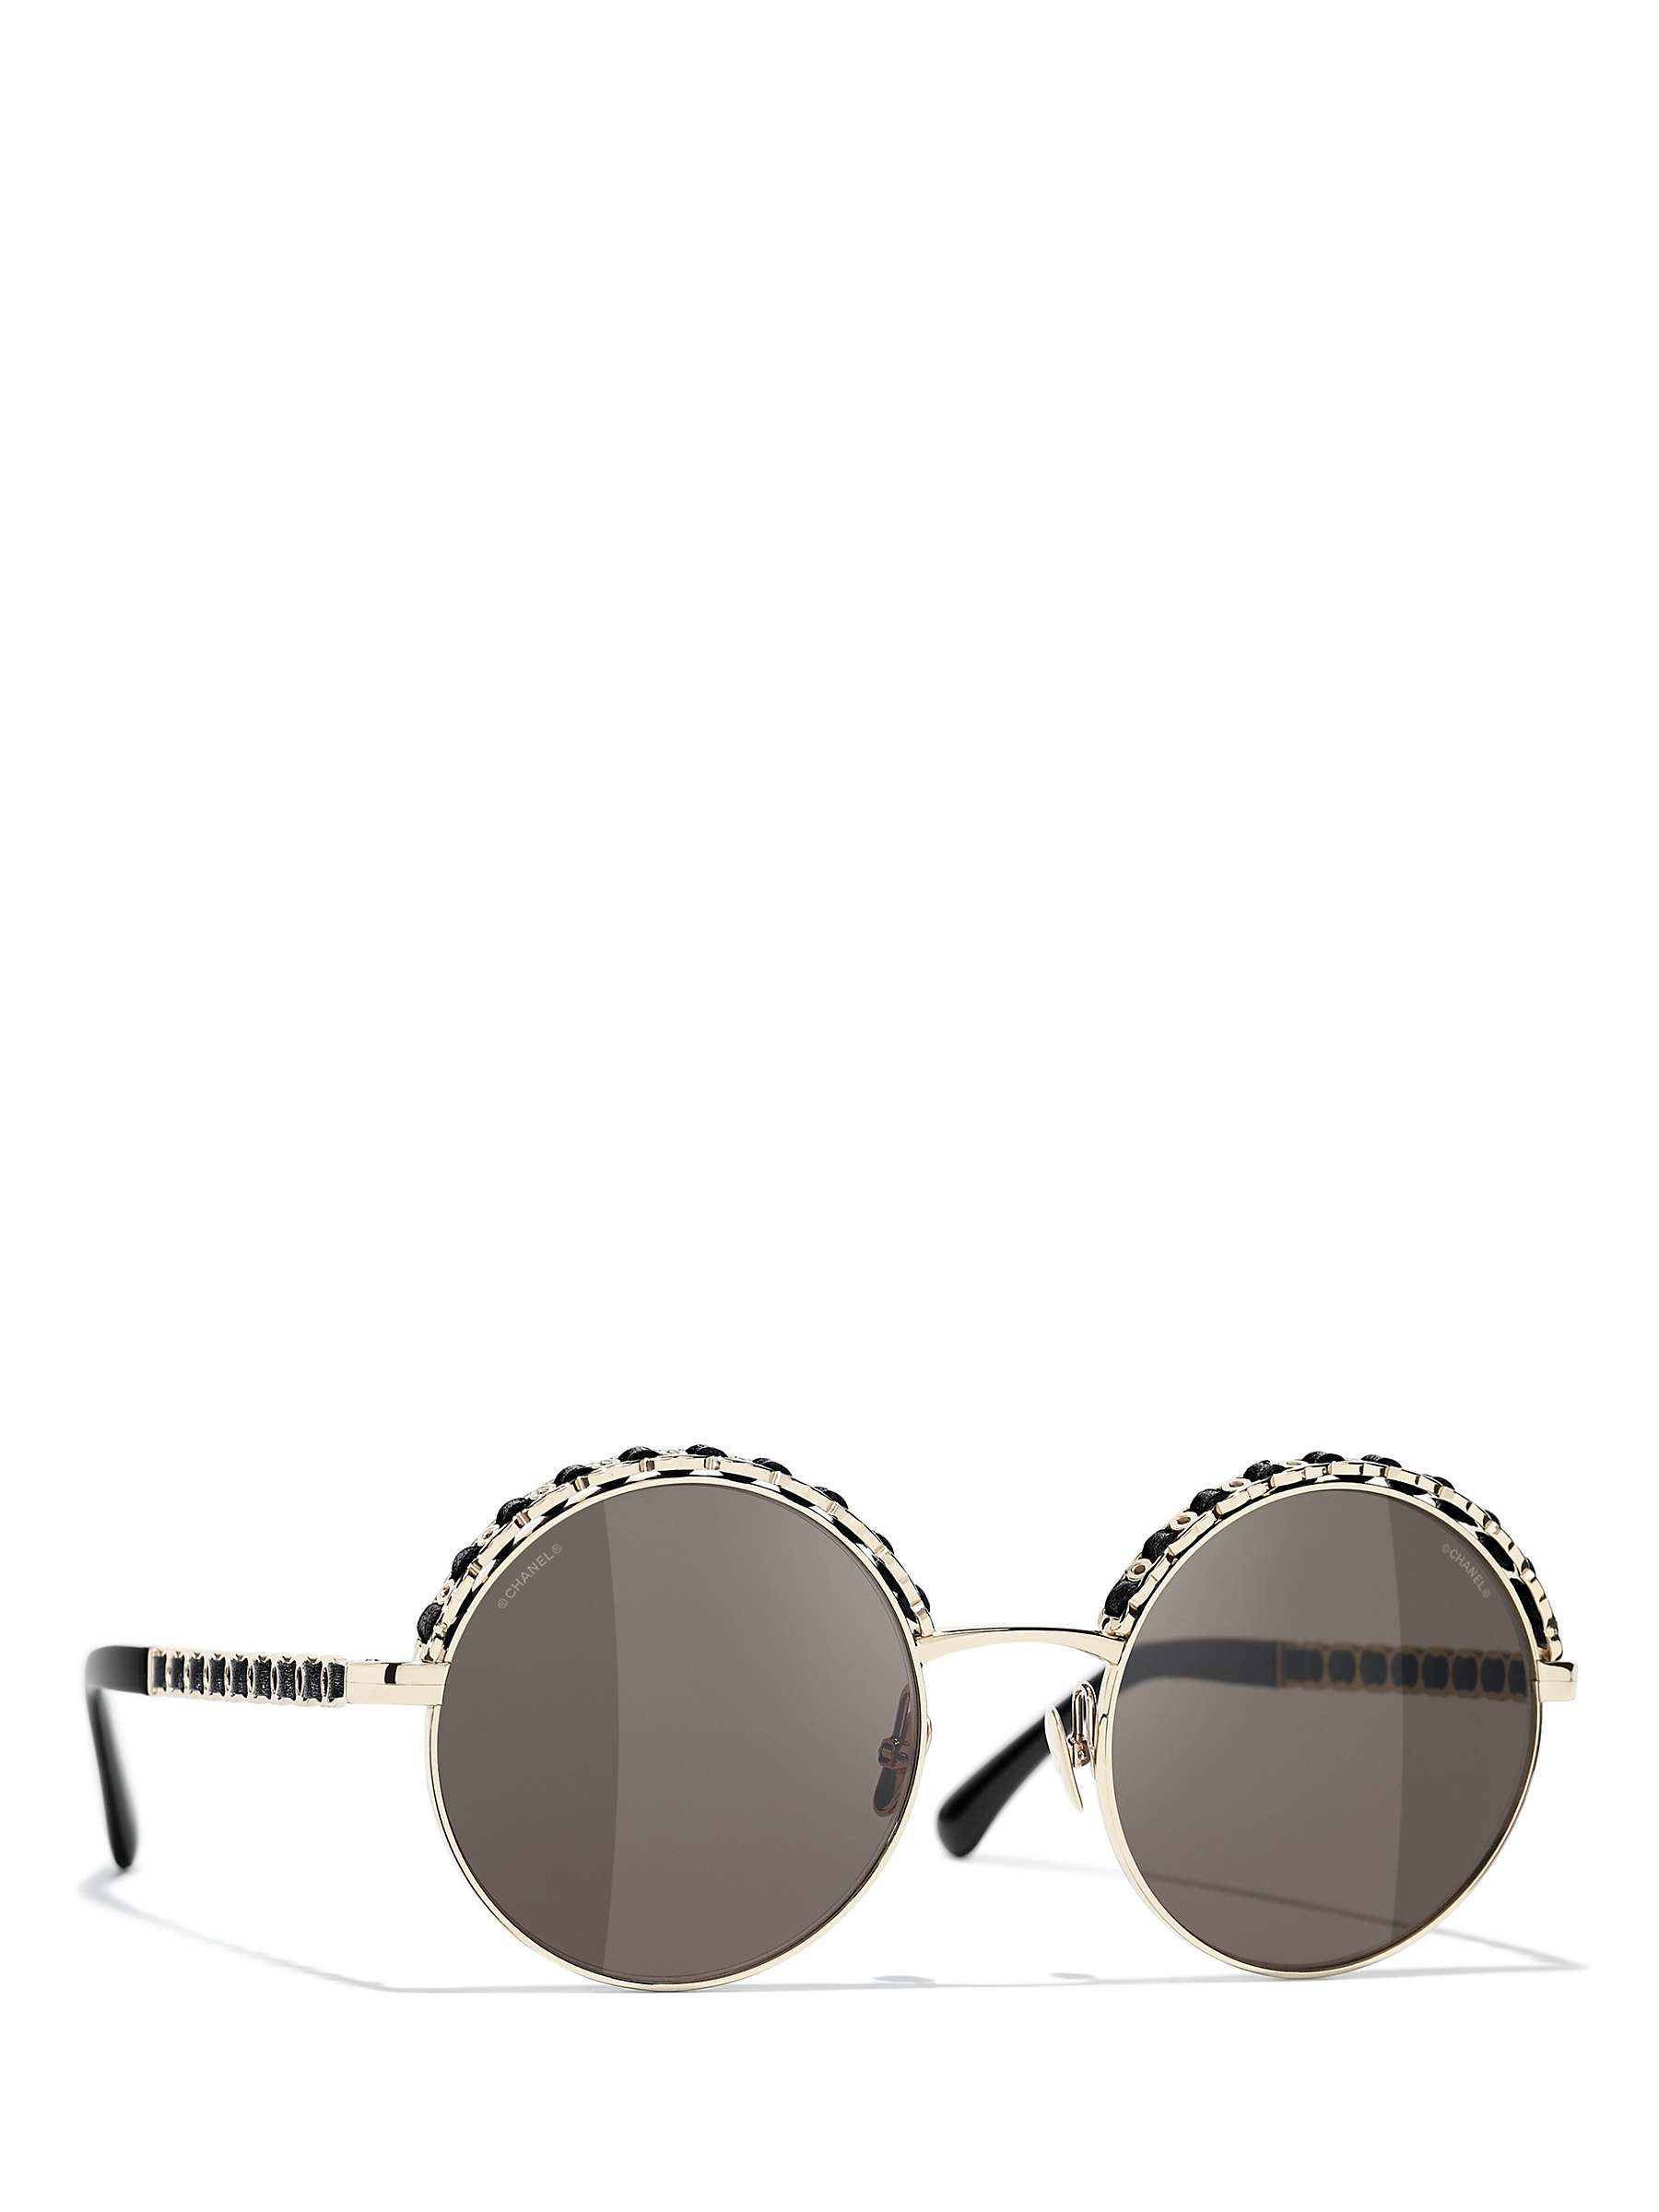 Buy CHANEL Round Sunglasses CH4265Q Pale Gold/Grey Online at johnlewis.com